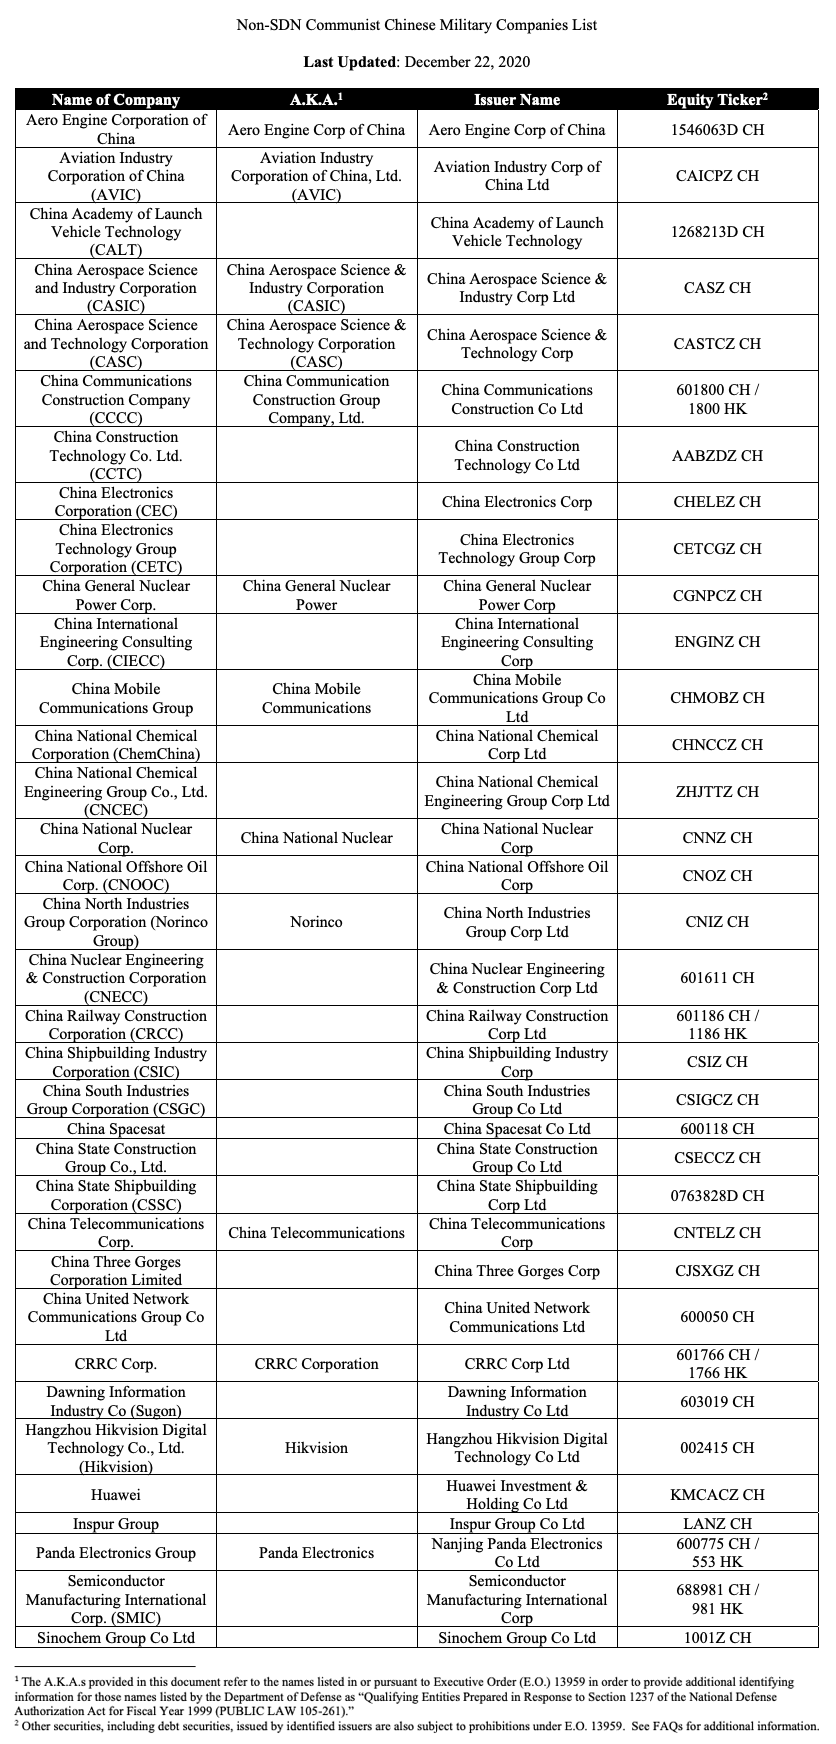 Non-SDN Communist Chinese Military Companies List